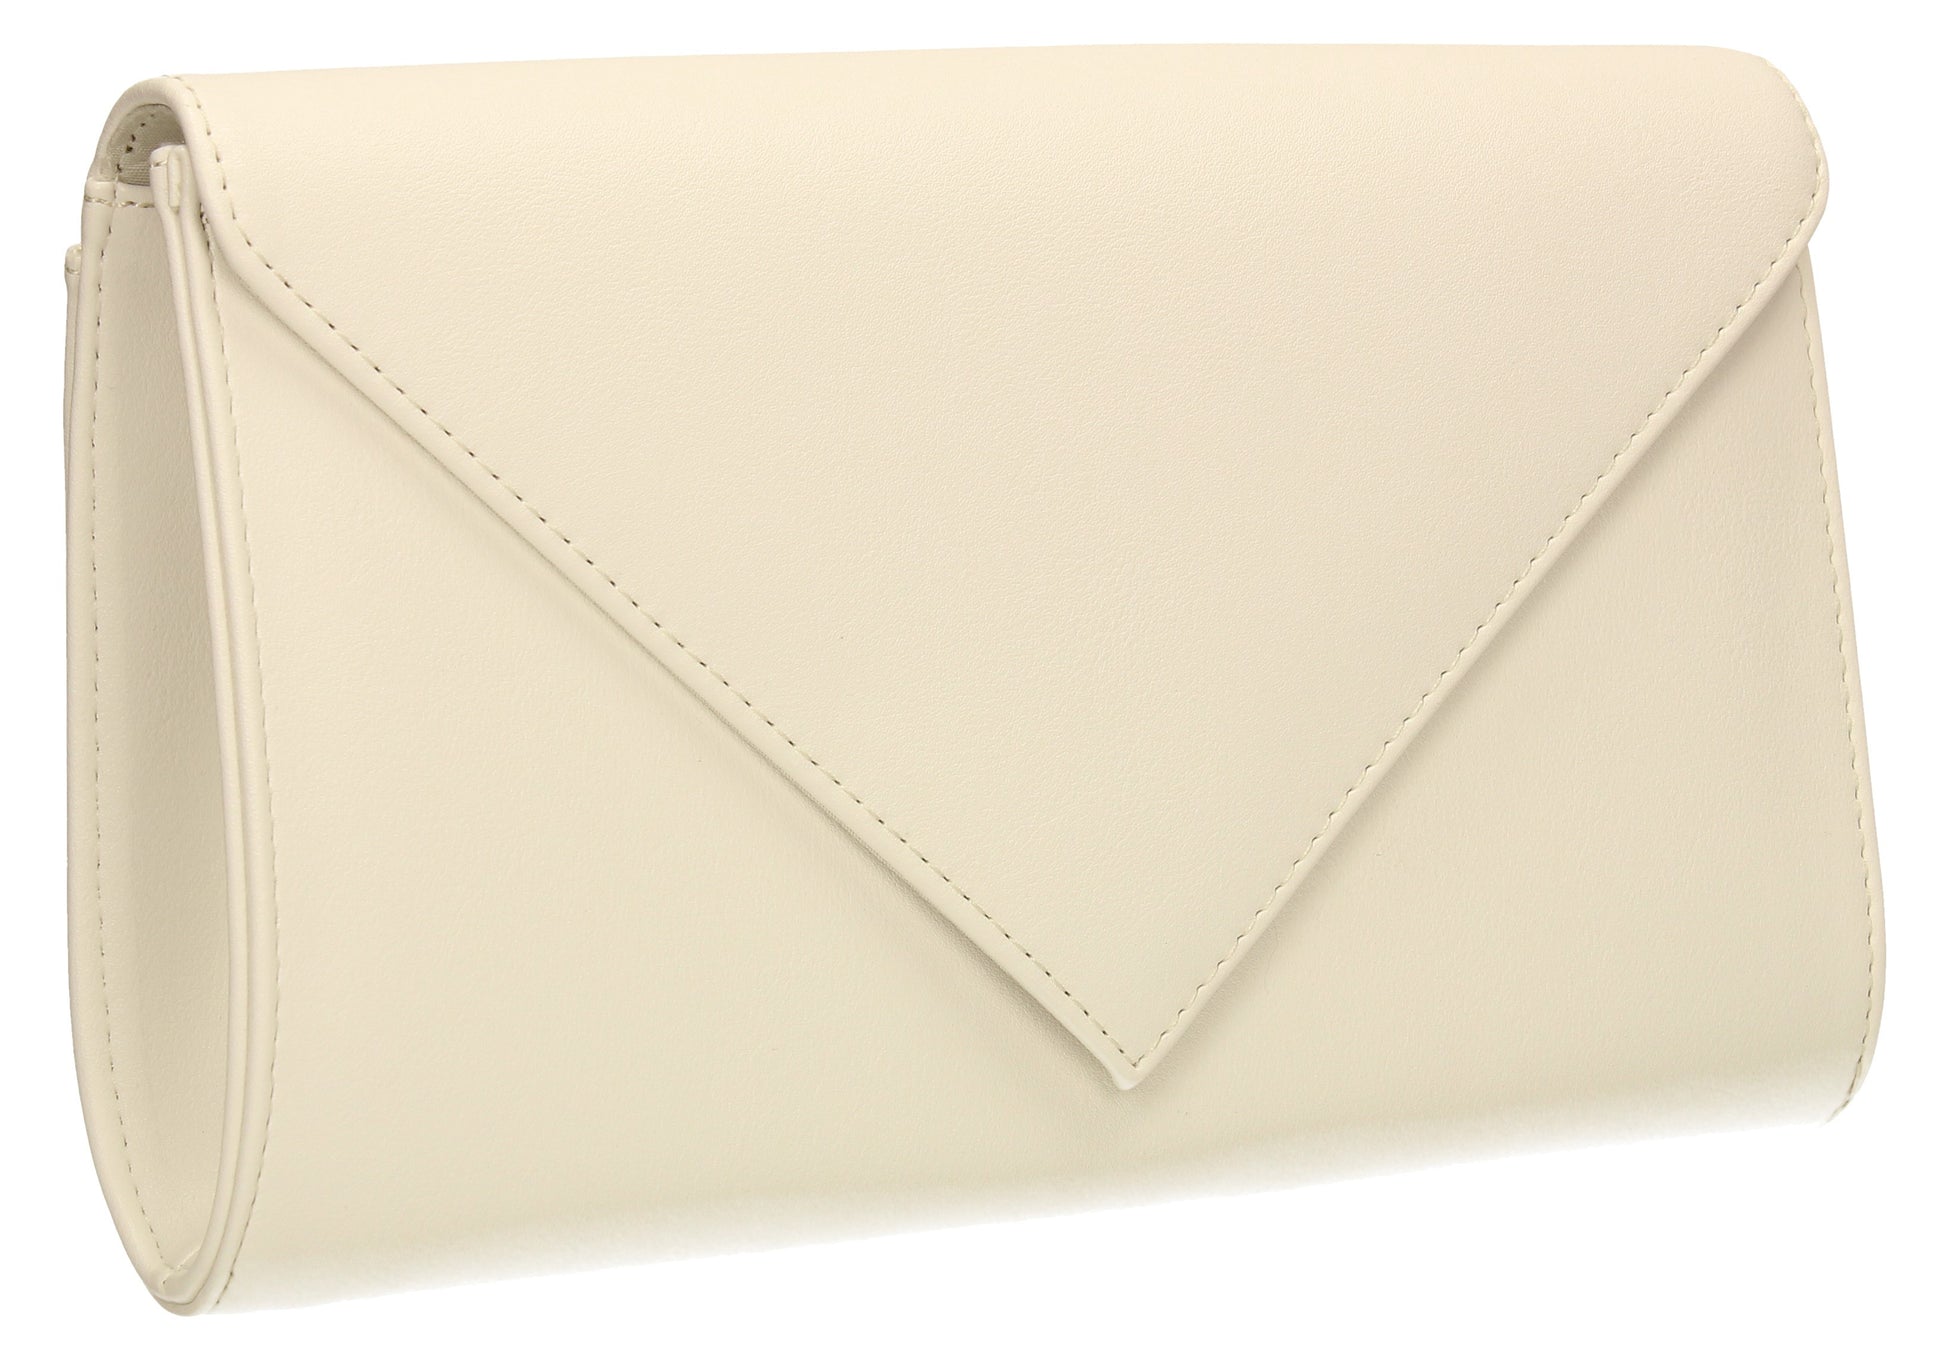 SWANKYSWANS Seraphina Clutch Bag White Cute Cheap Clutch Bag For Weddings School and Work